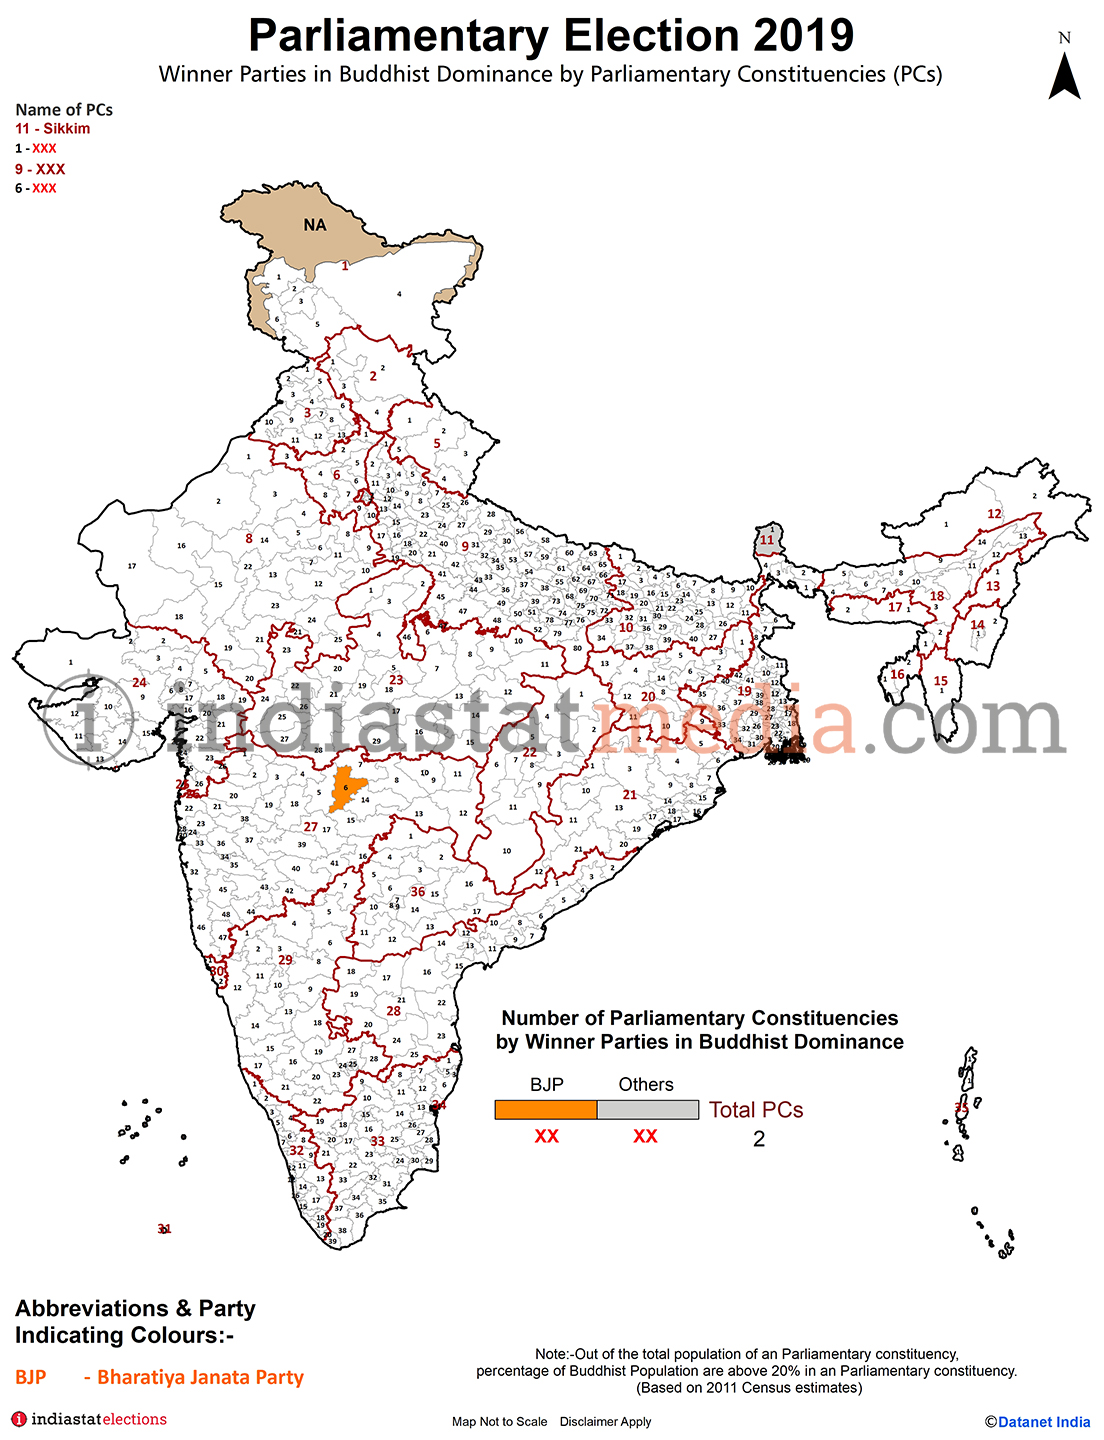 Winner Parties in Buddhist Dominance by Parliamentary Constituencies in India (Parliamentary Election - 2019)